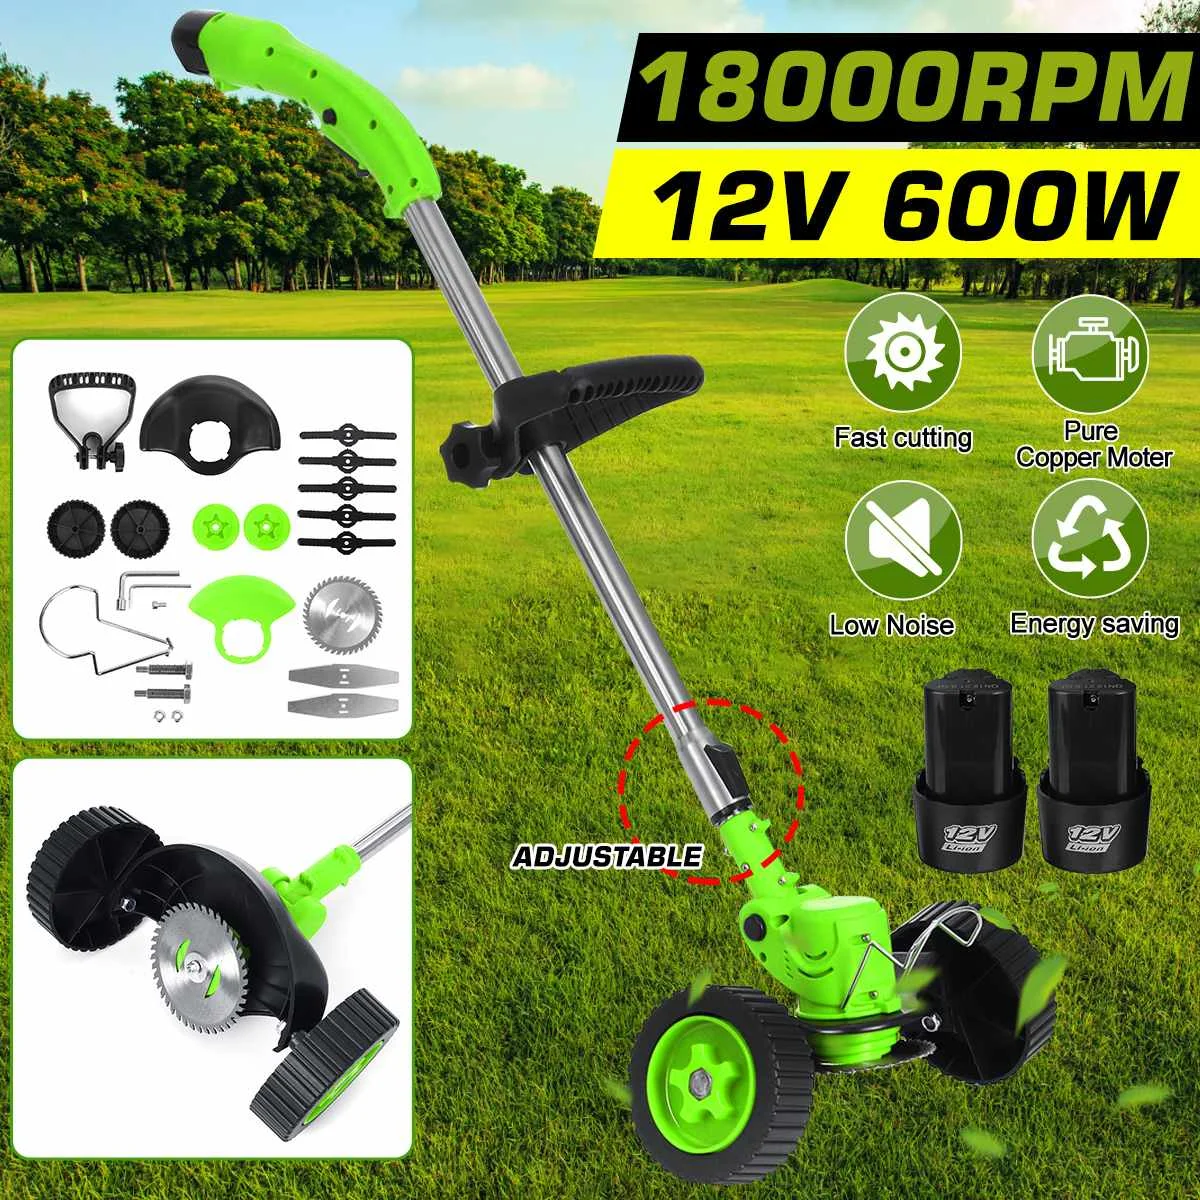 18VF 600W Powerful Electric Grass Trimmer Cutter Weeder Lawn Mower Cordless Cutting Machine Garden Tool With 2PC Li-ion Battery